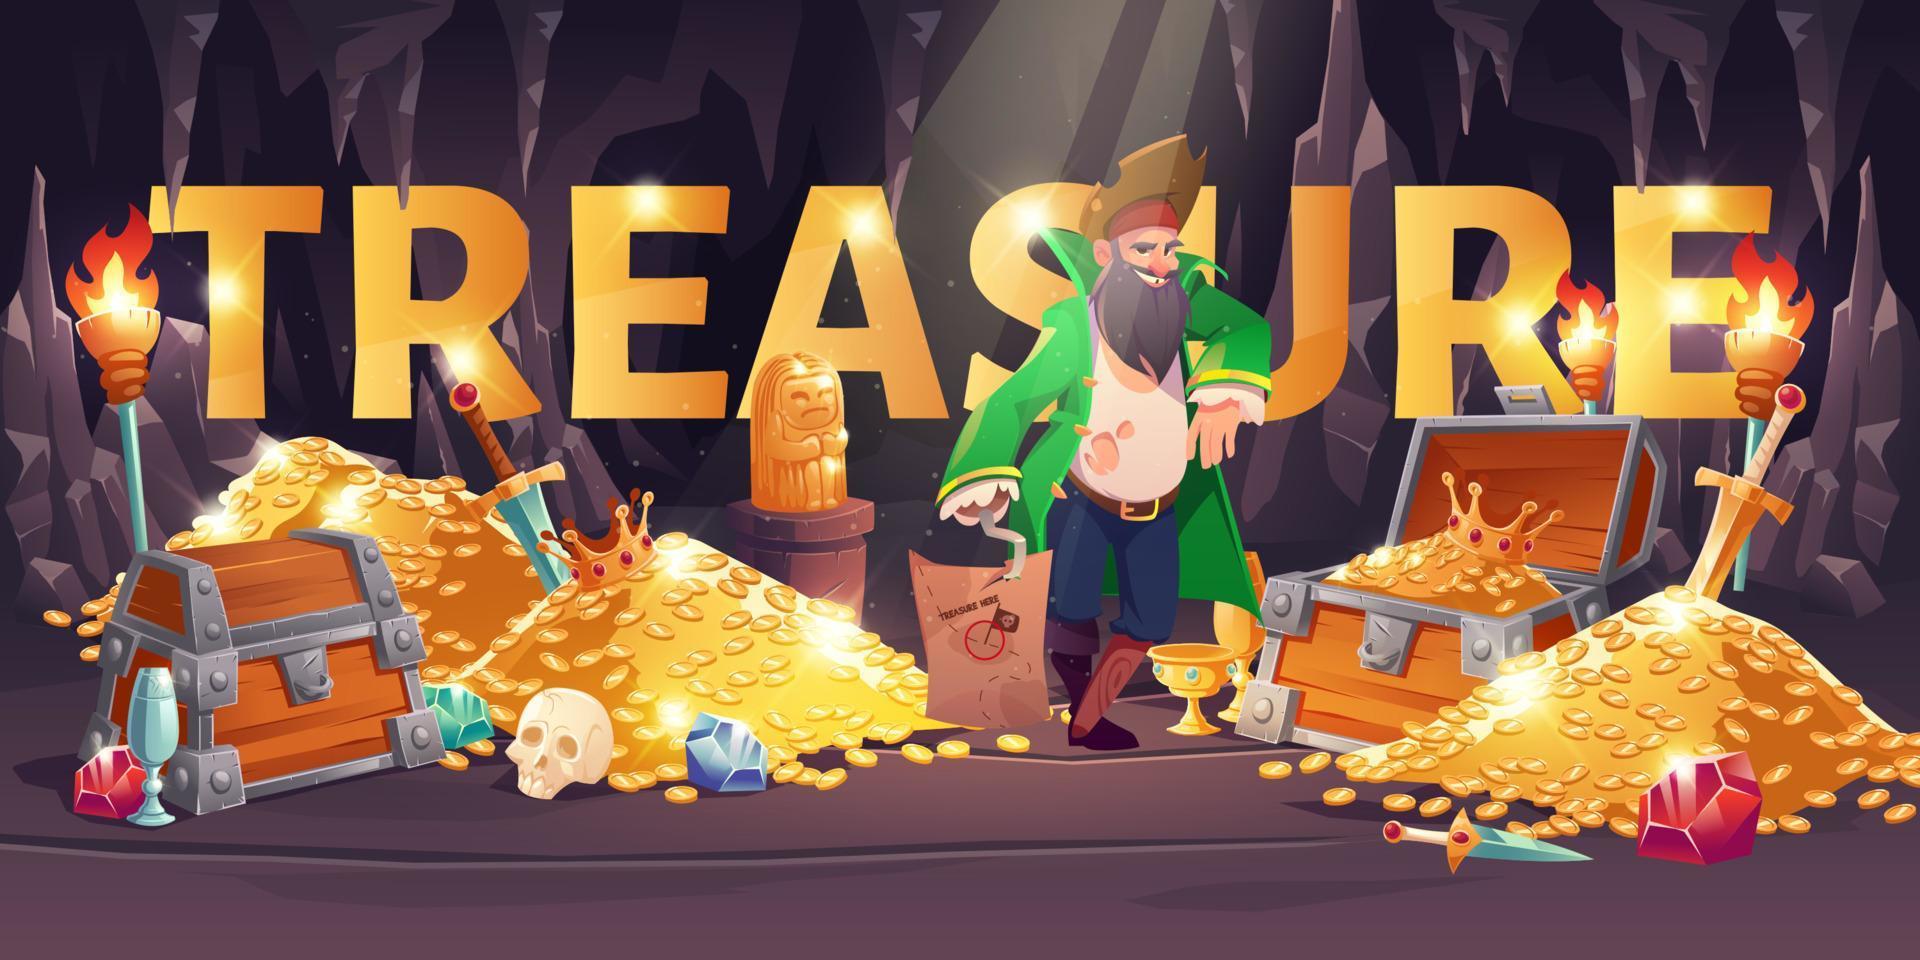 Treasure cartoon banner with pirate in cave gold vector